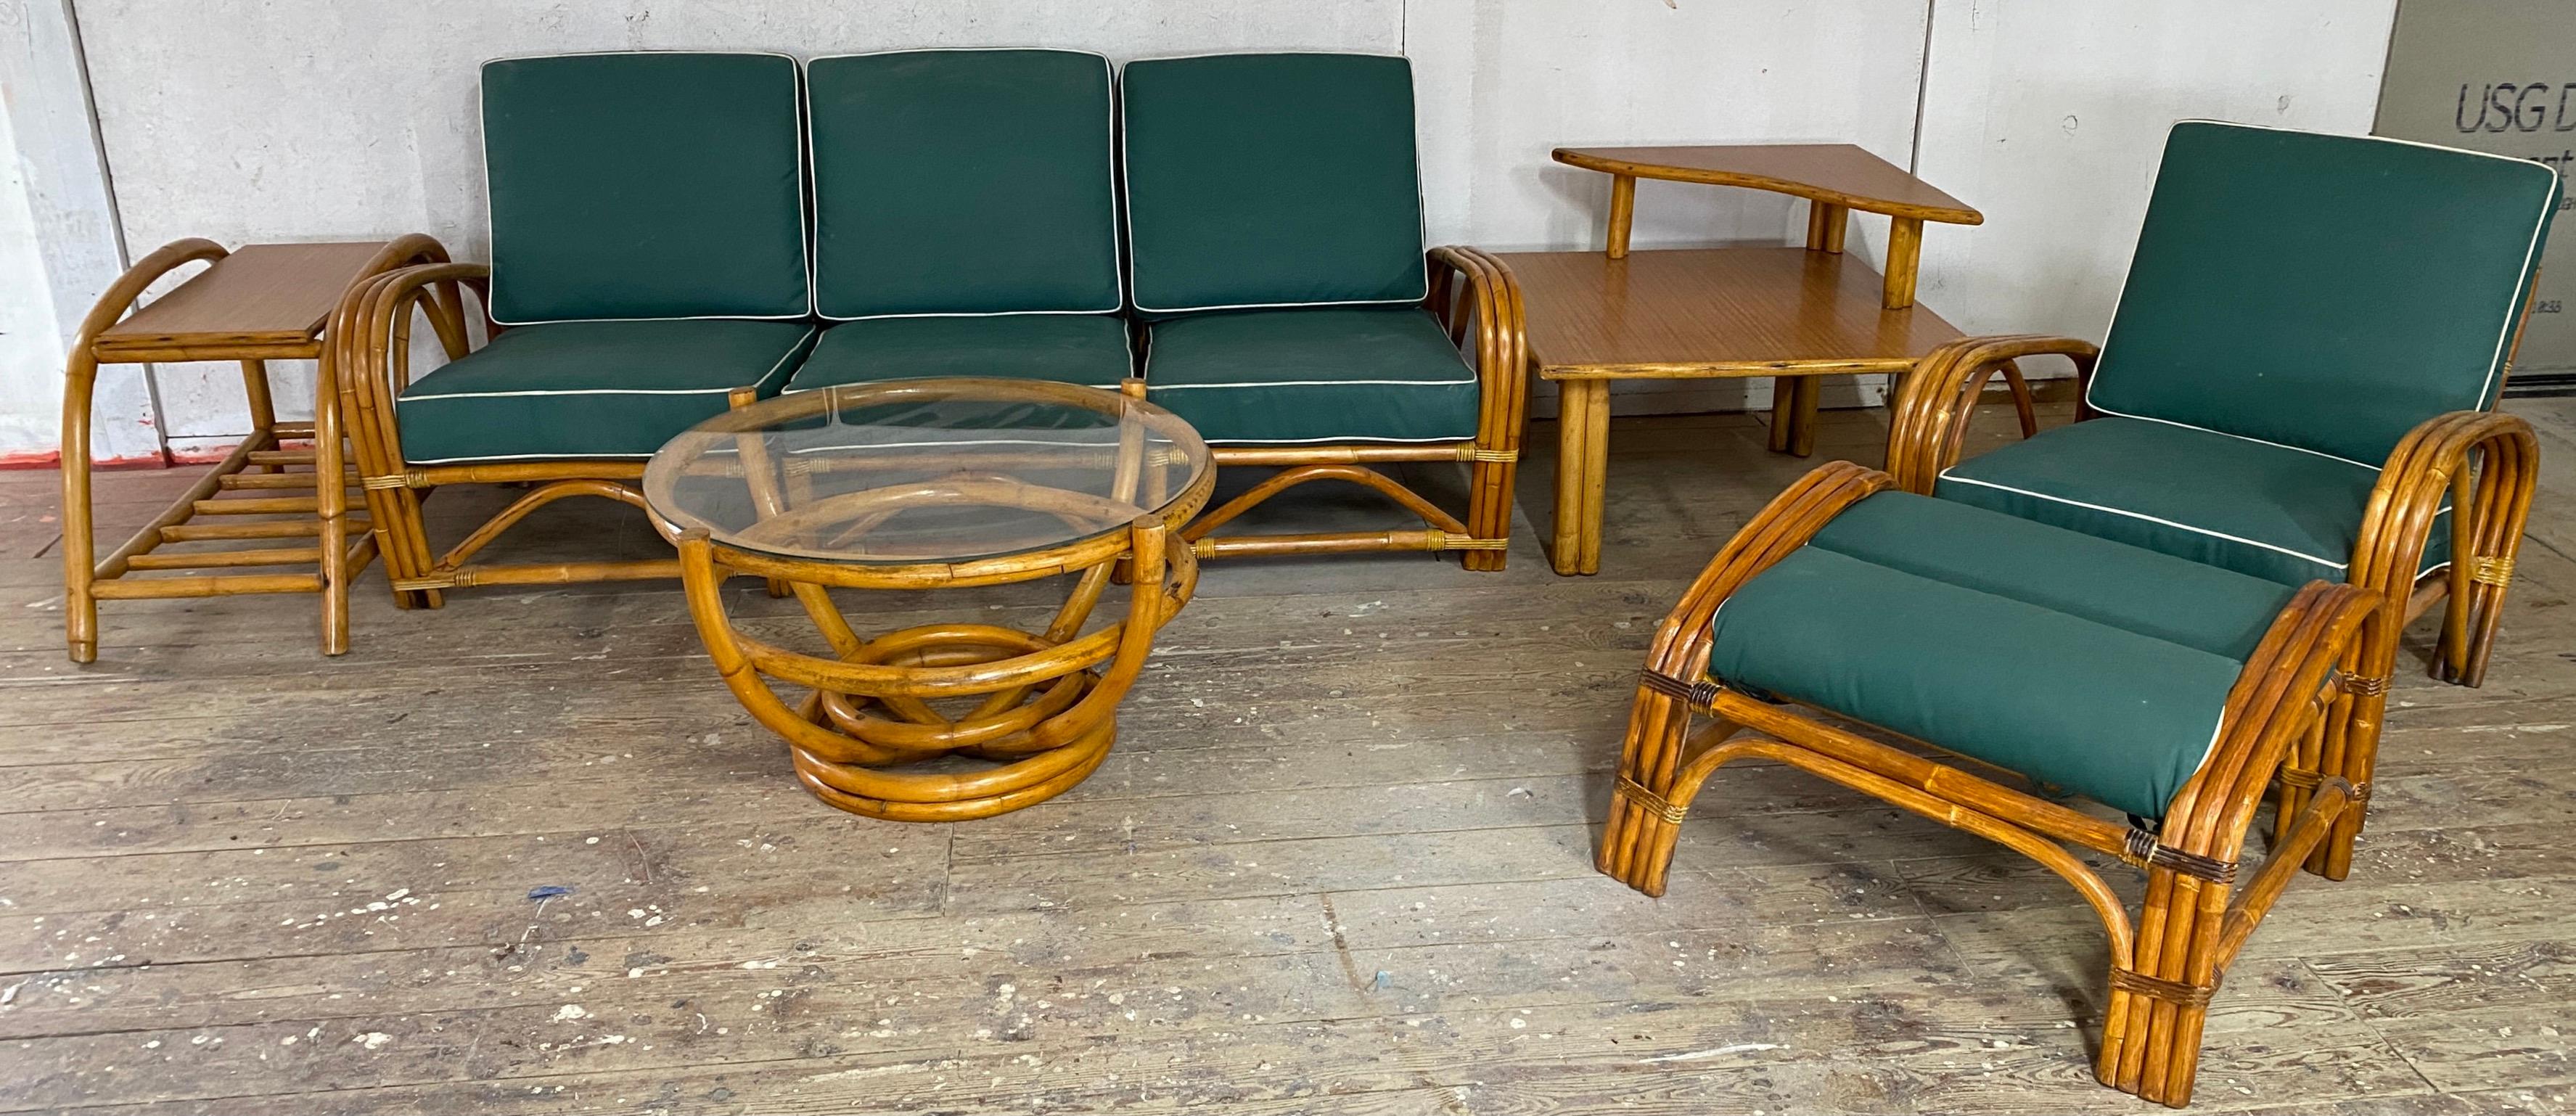 6 Piece Art Deco Bentwood Bamboo Wicker Seating Ensemble For Sale 5